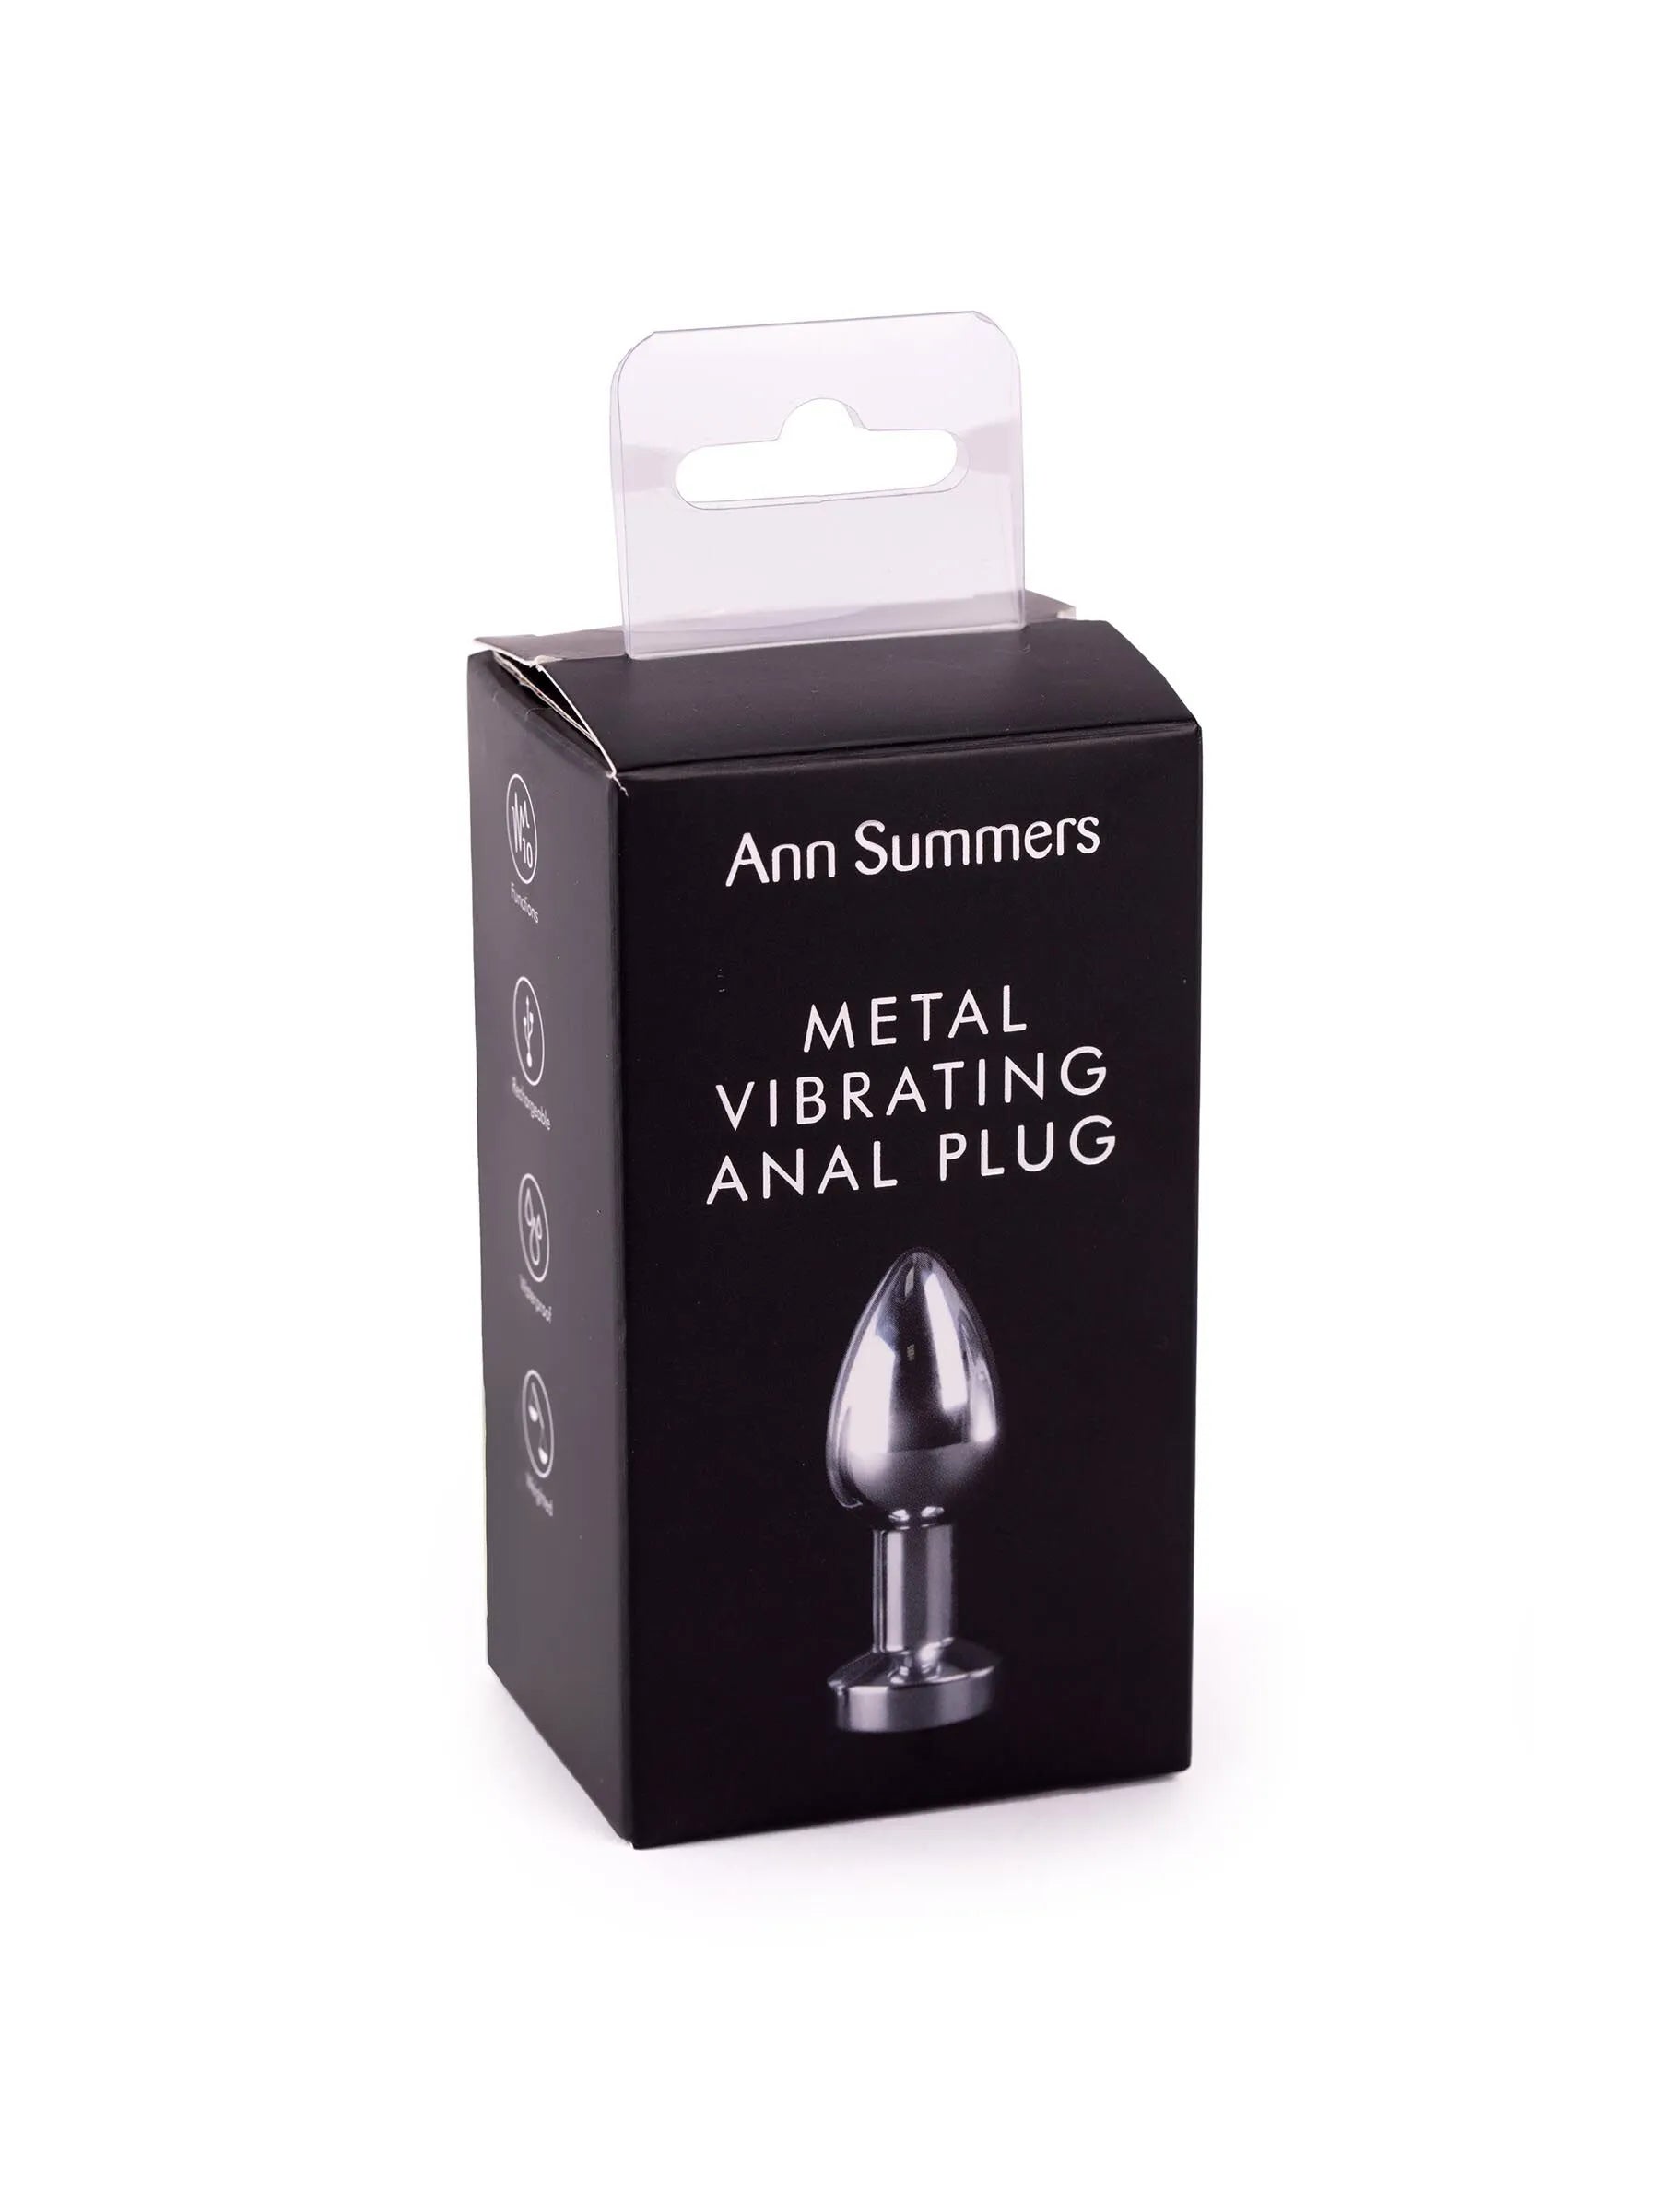 Metal Vibrating Anal Plug From Ann Summers, Image 05